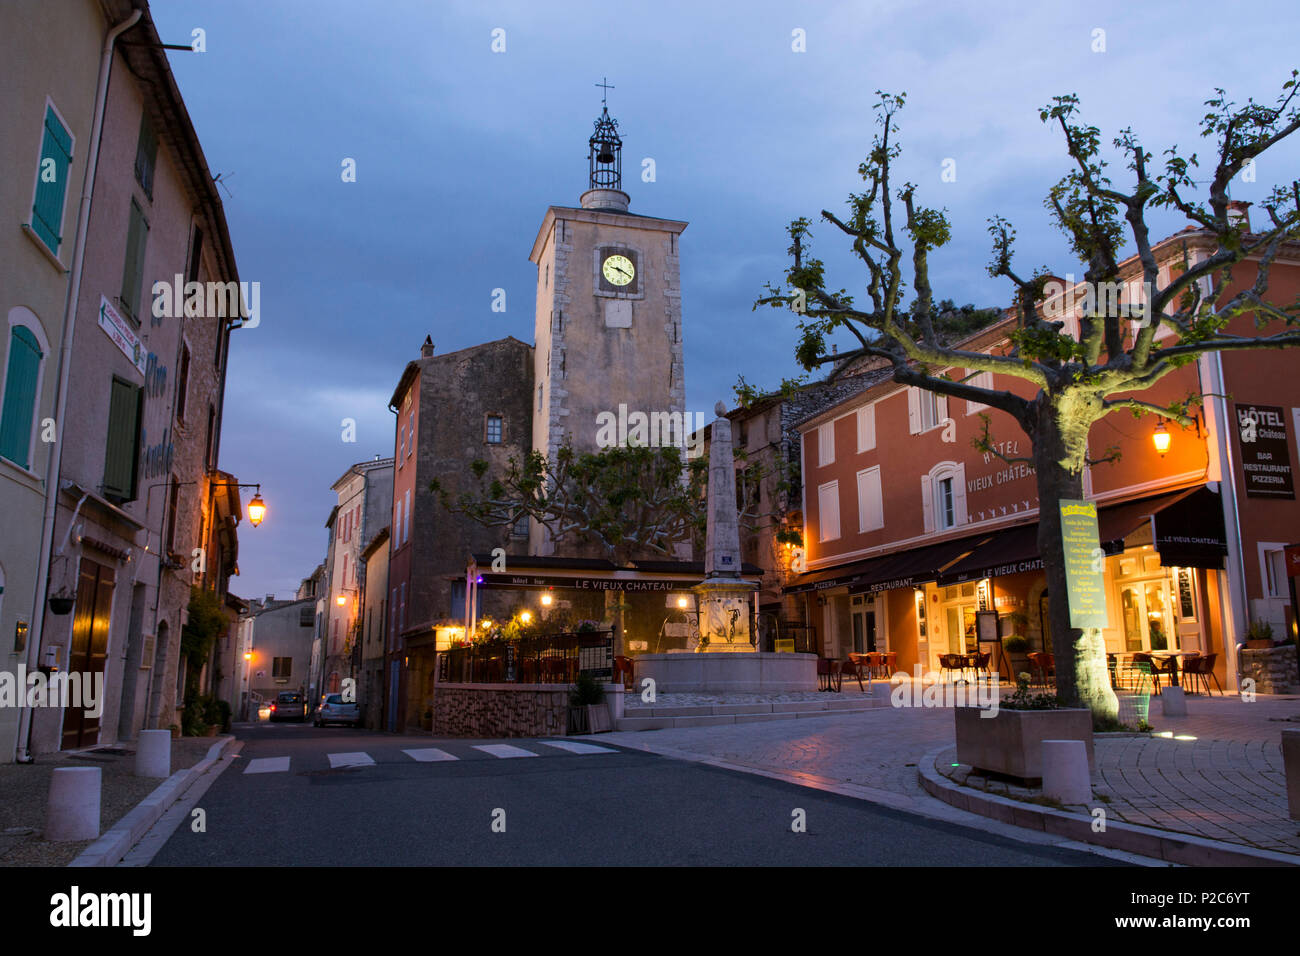 Evening ambiance on the village square of Aiguines, Var department, Provence-Alpes-Cote d’Azur region, France Stock Photo